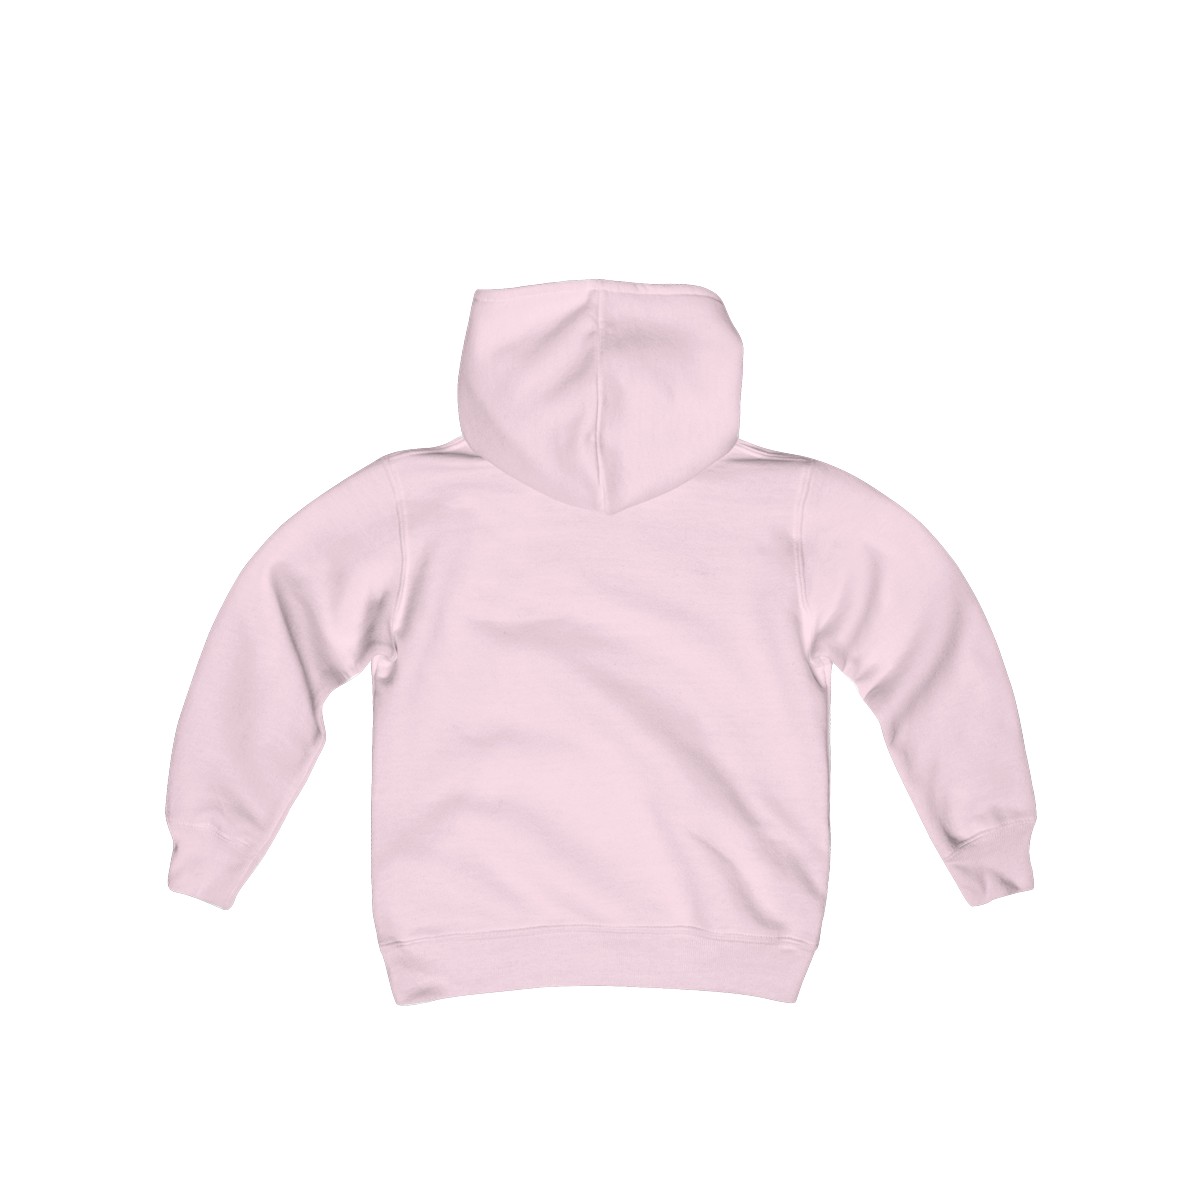 Youth Sizes - All That Dance Hoodies product thumbnail image